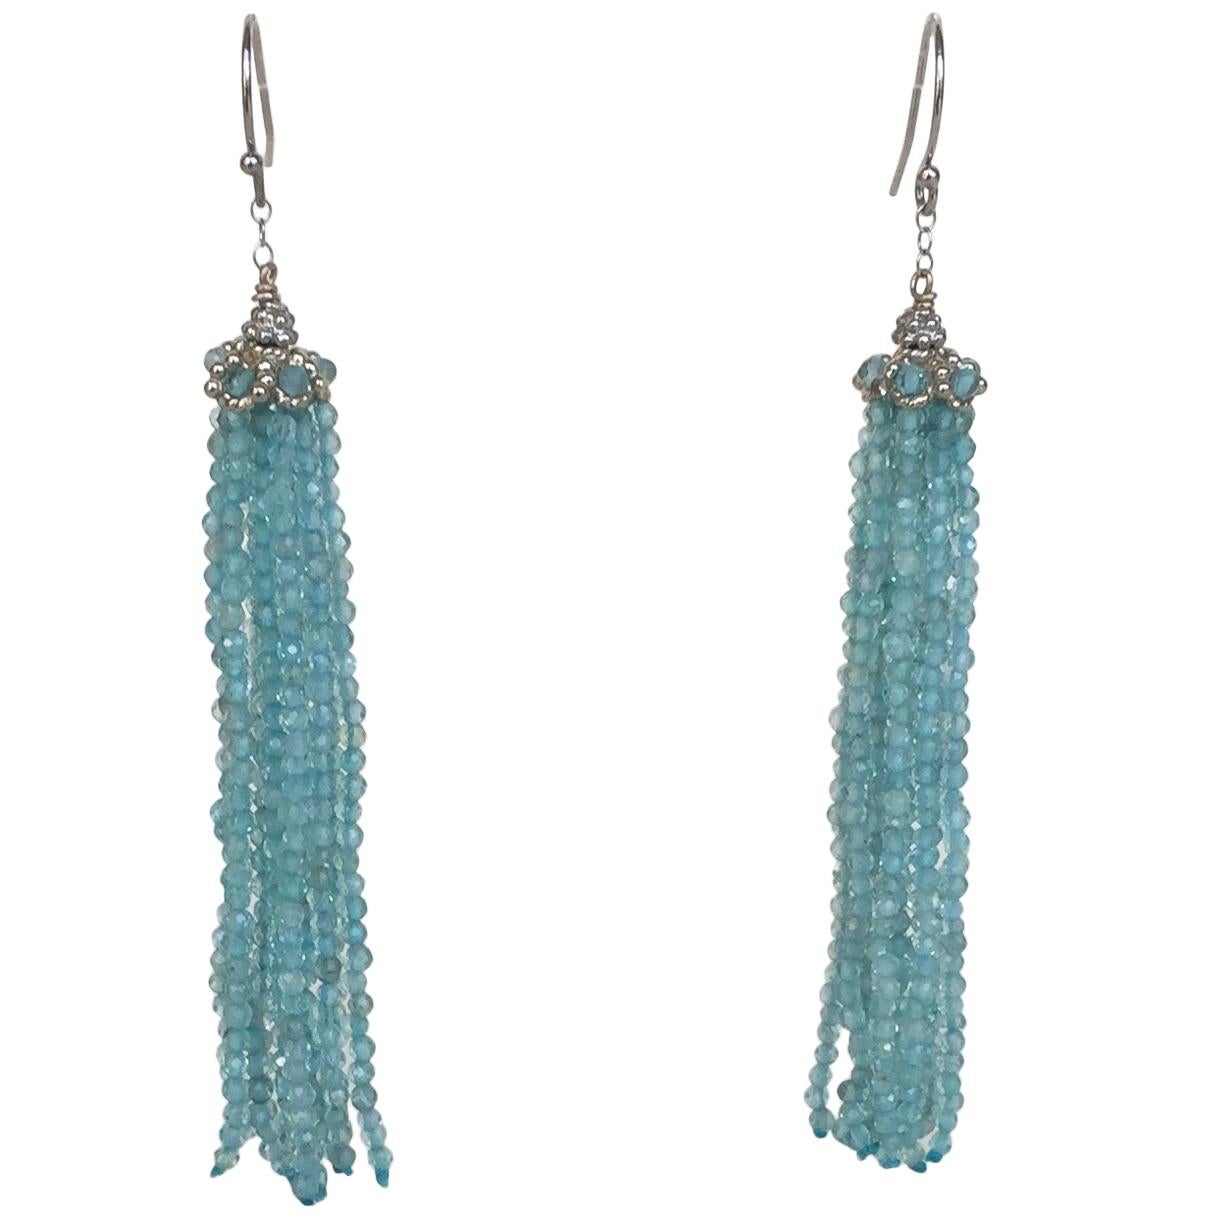 Marina J Faceted Aquamarine Tassel Earrings with 14 K White Gold Chain and Hook